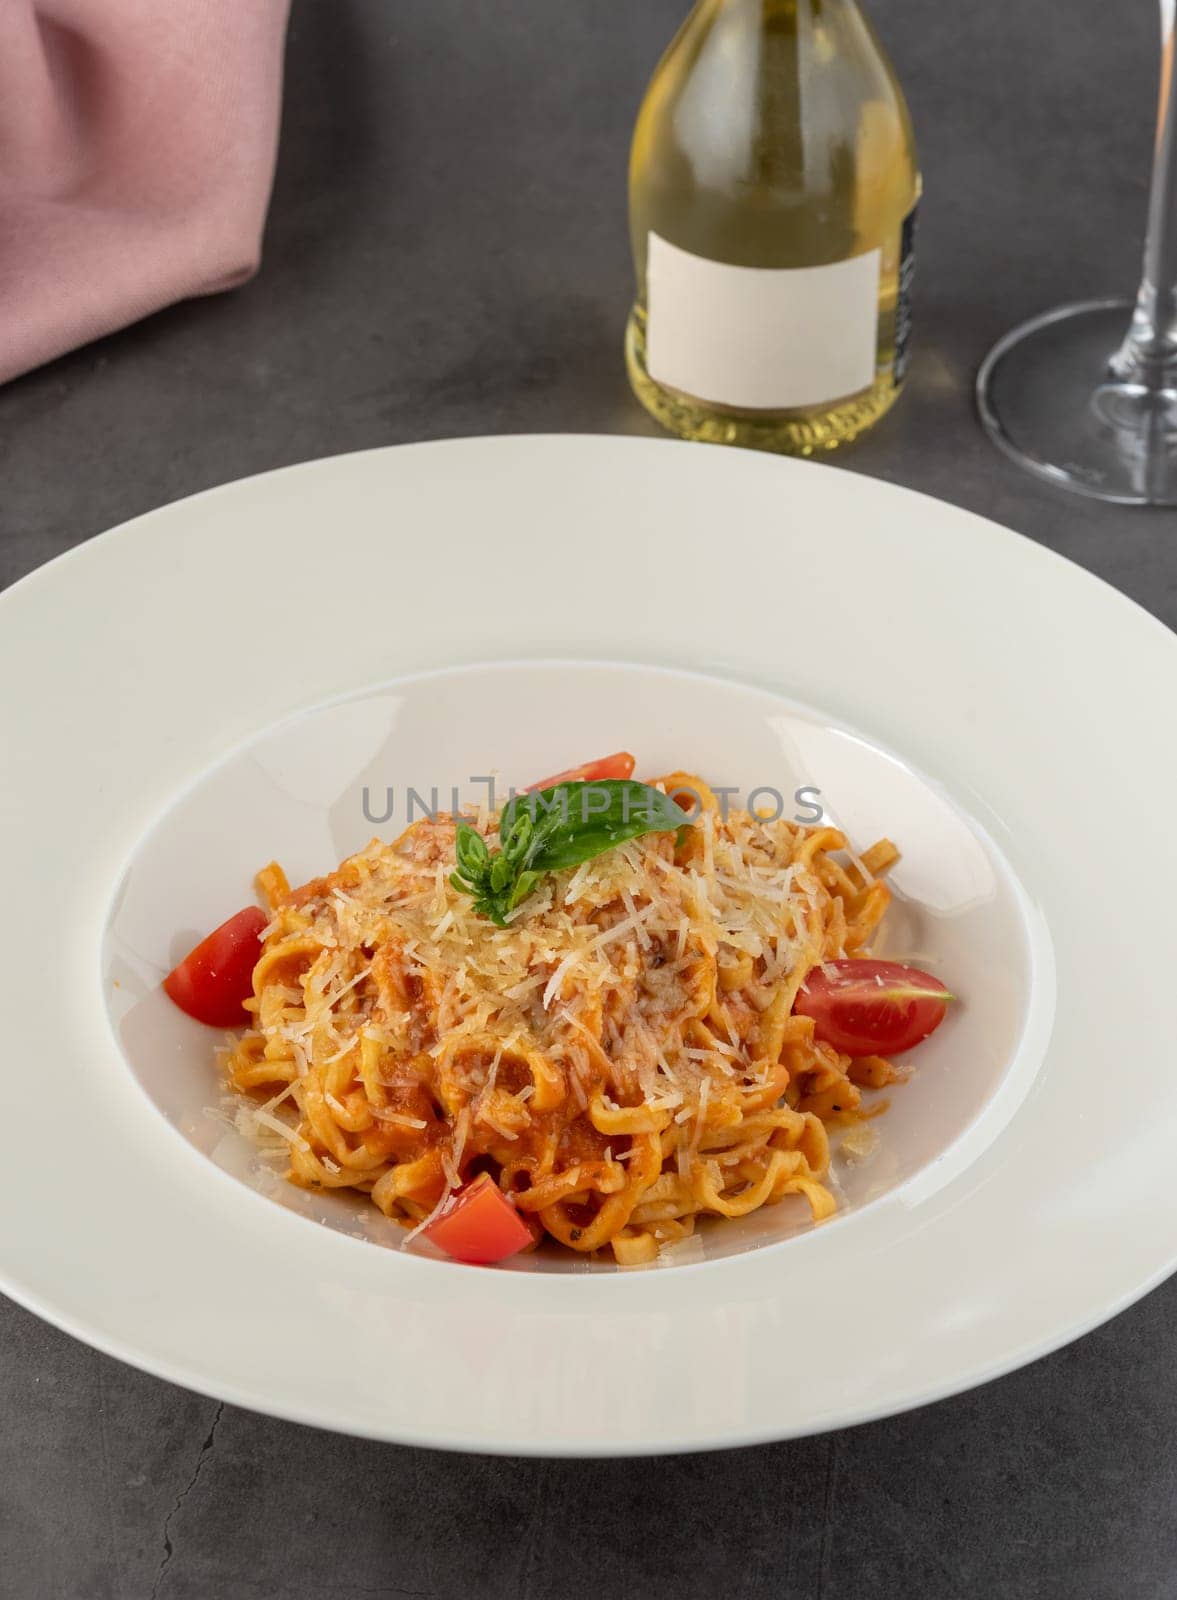 Spaghetti with Marinara sauce served in a fine dining restaurant by Sonat